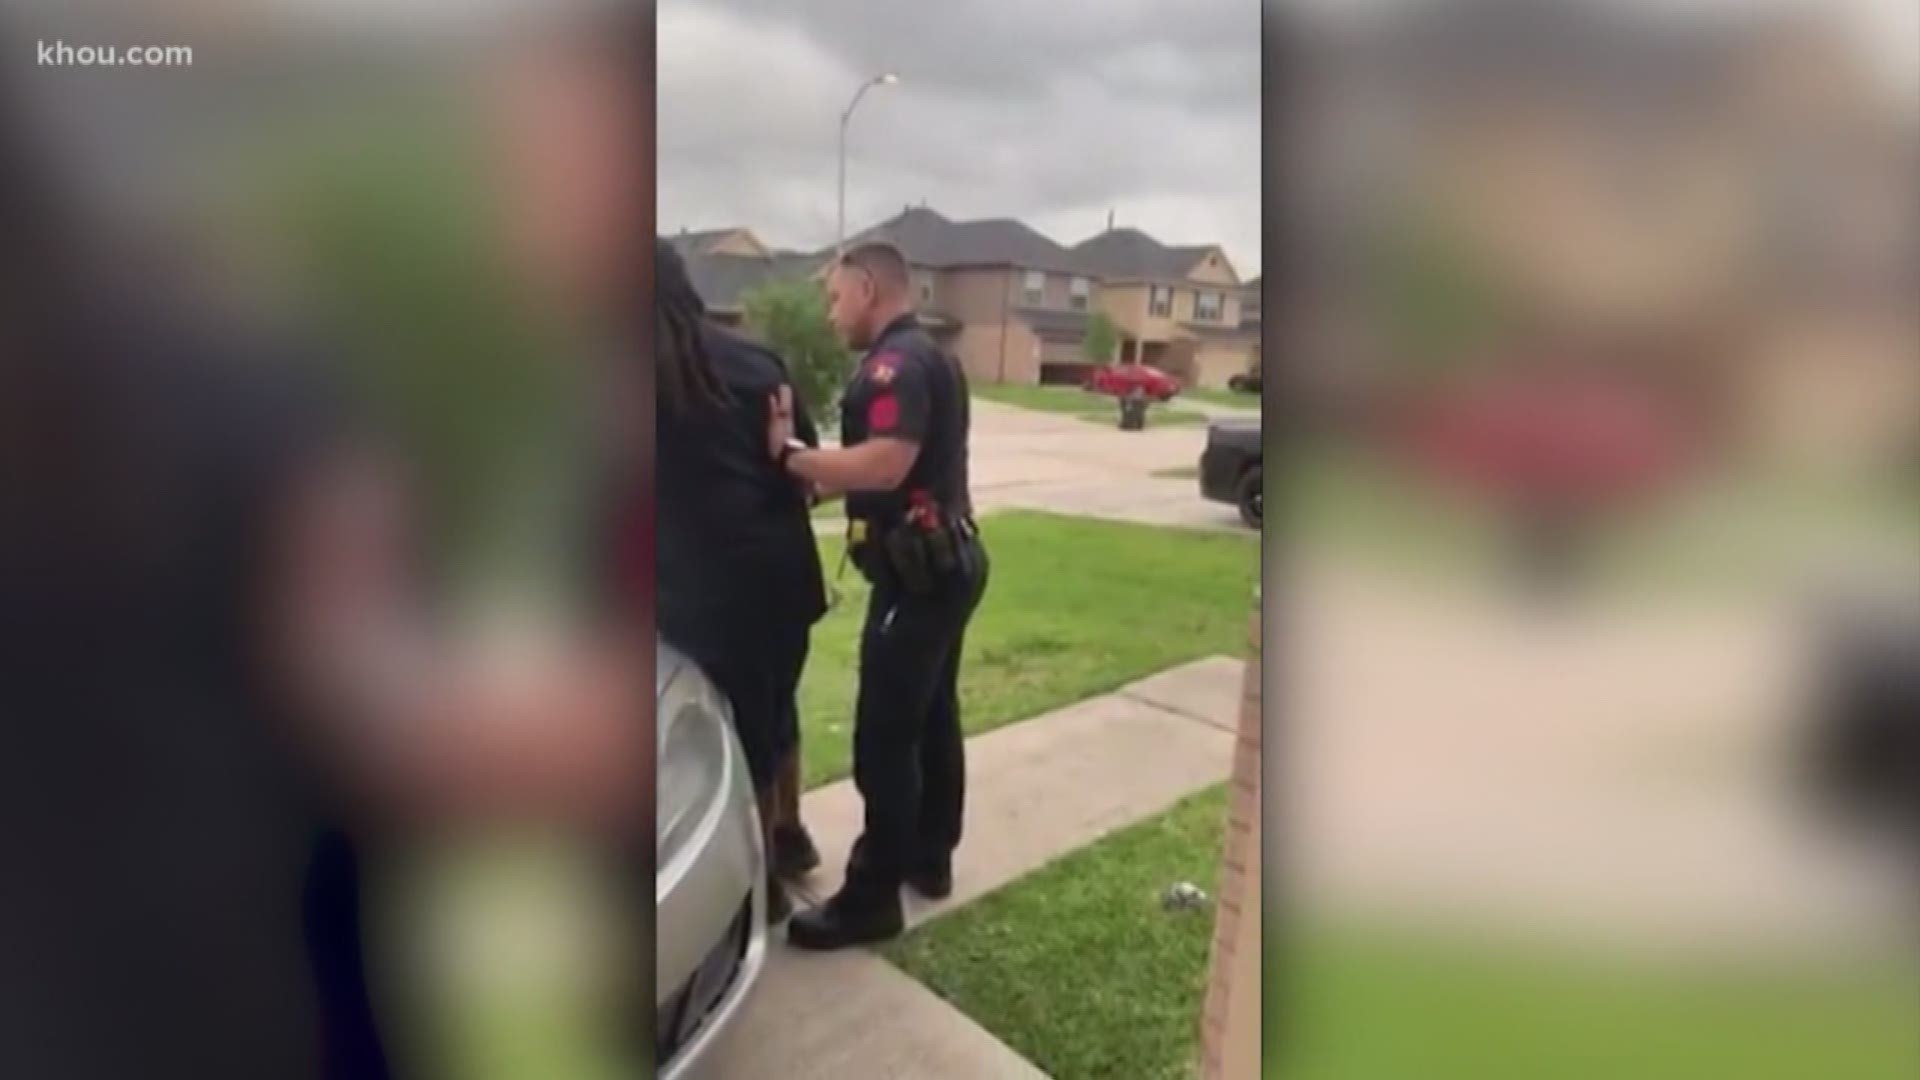 A father seen cussing out deputies in a viral video claims his civil rights were violated. Harris County Precinct 4 Constable Mark Herman saw no wrong.